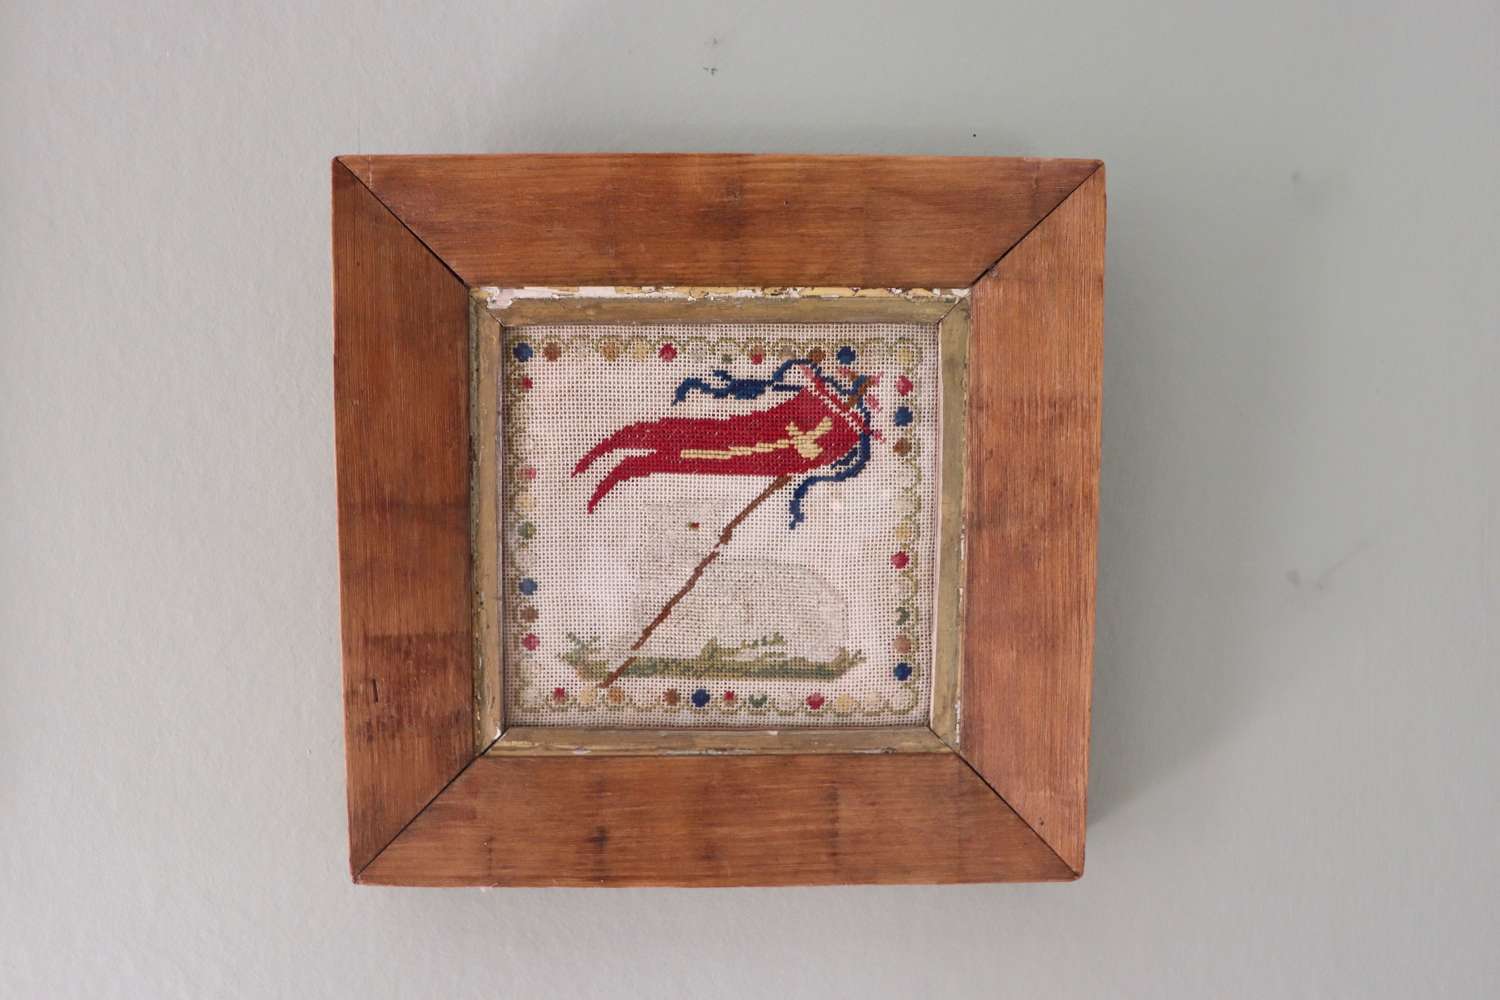 19th century needlepoint of lamb and flag in pine frame